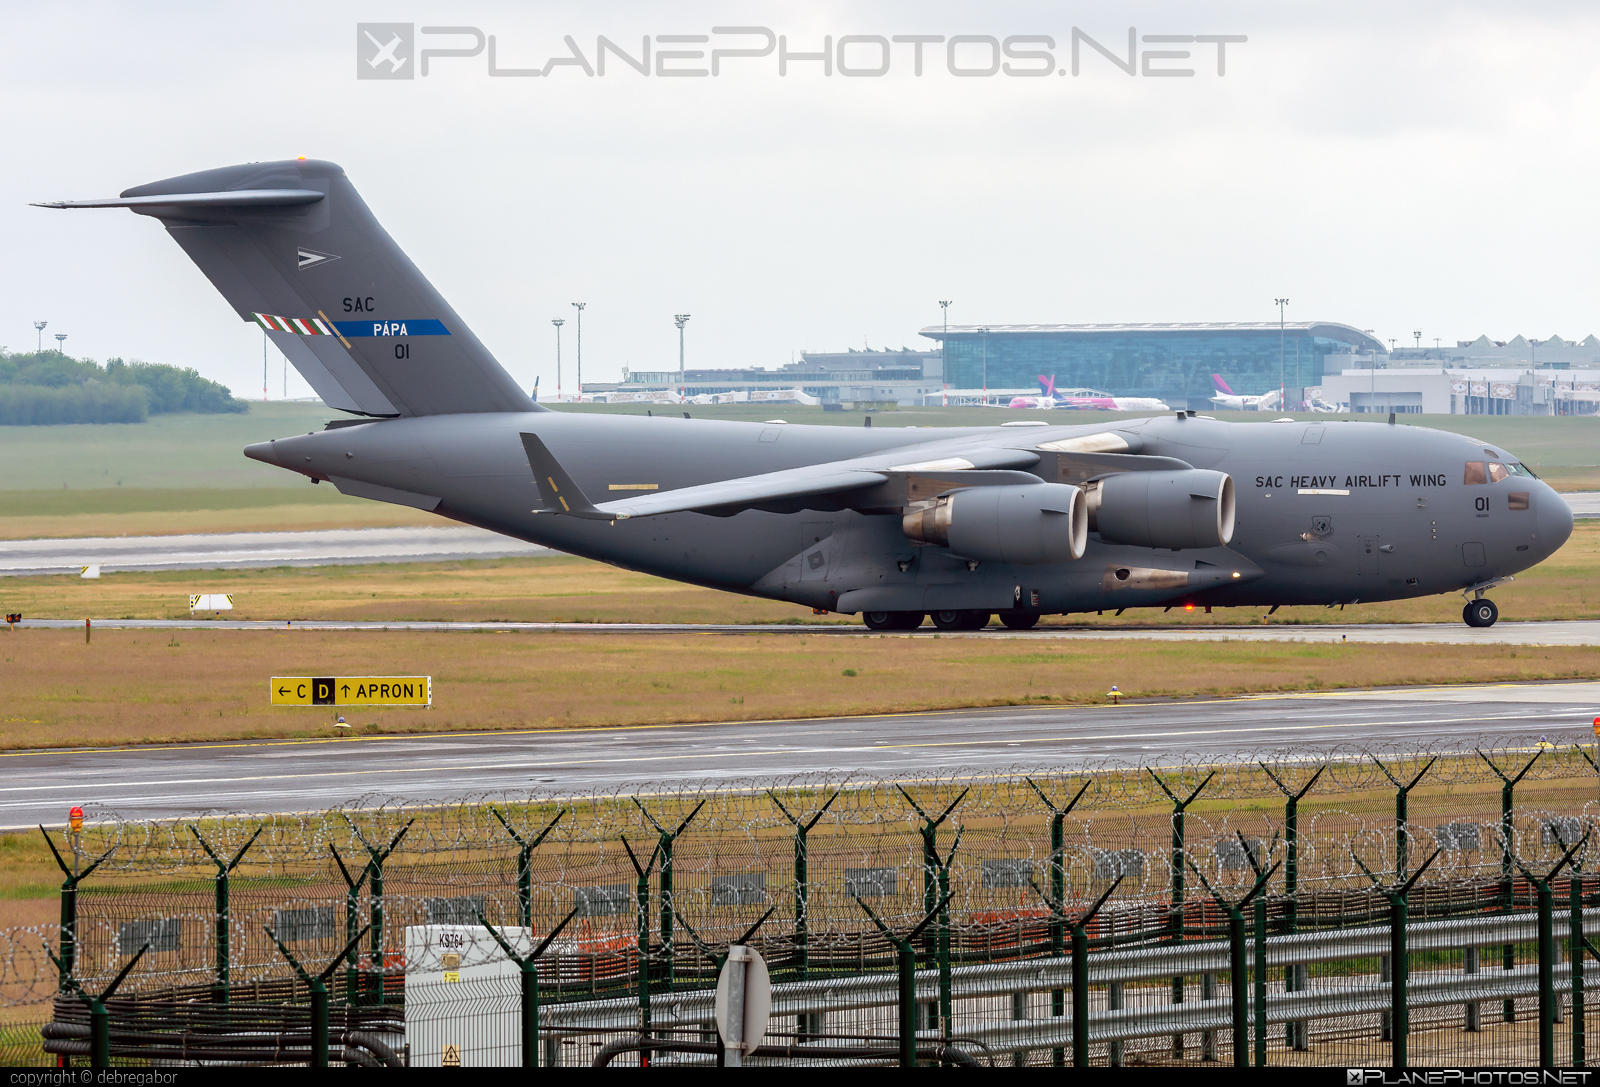 Boeing C-17A Globemaster III - 01 operated by NATO Strategic Airlift Capability (SAC) #boeing #c17 #c17globemaster #globemaster #globemasteriii #natostrategicairliftcapability #strategicairliftcapability